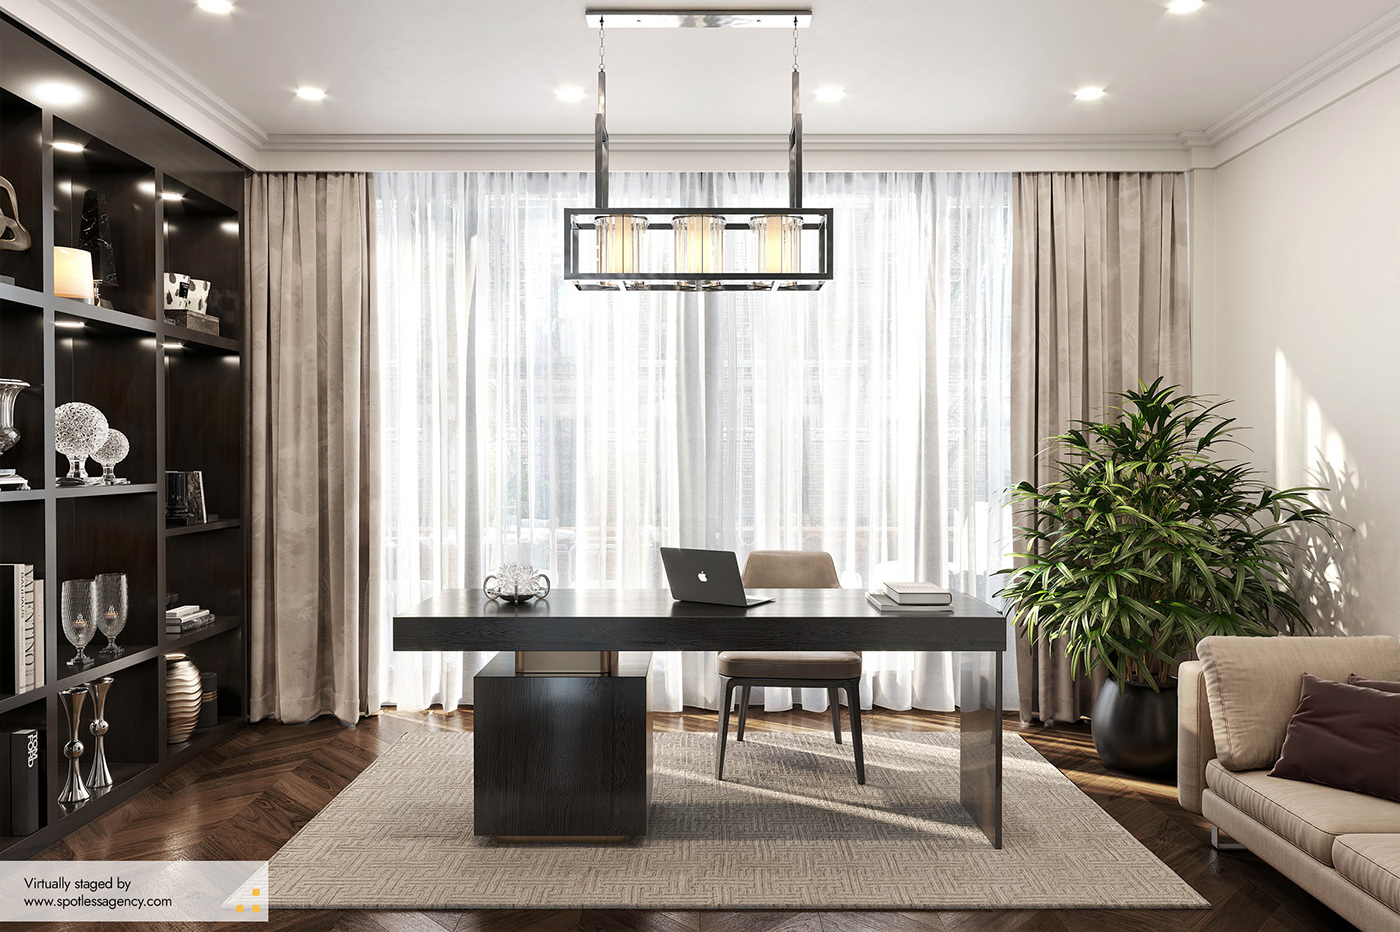 Digital Staging home office home staging Interior interior design  Office spottlessagency staging virtual virtual staging